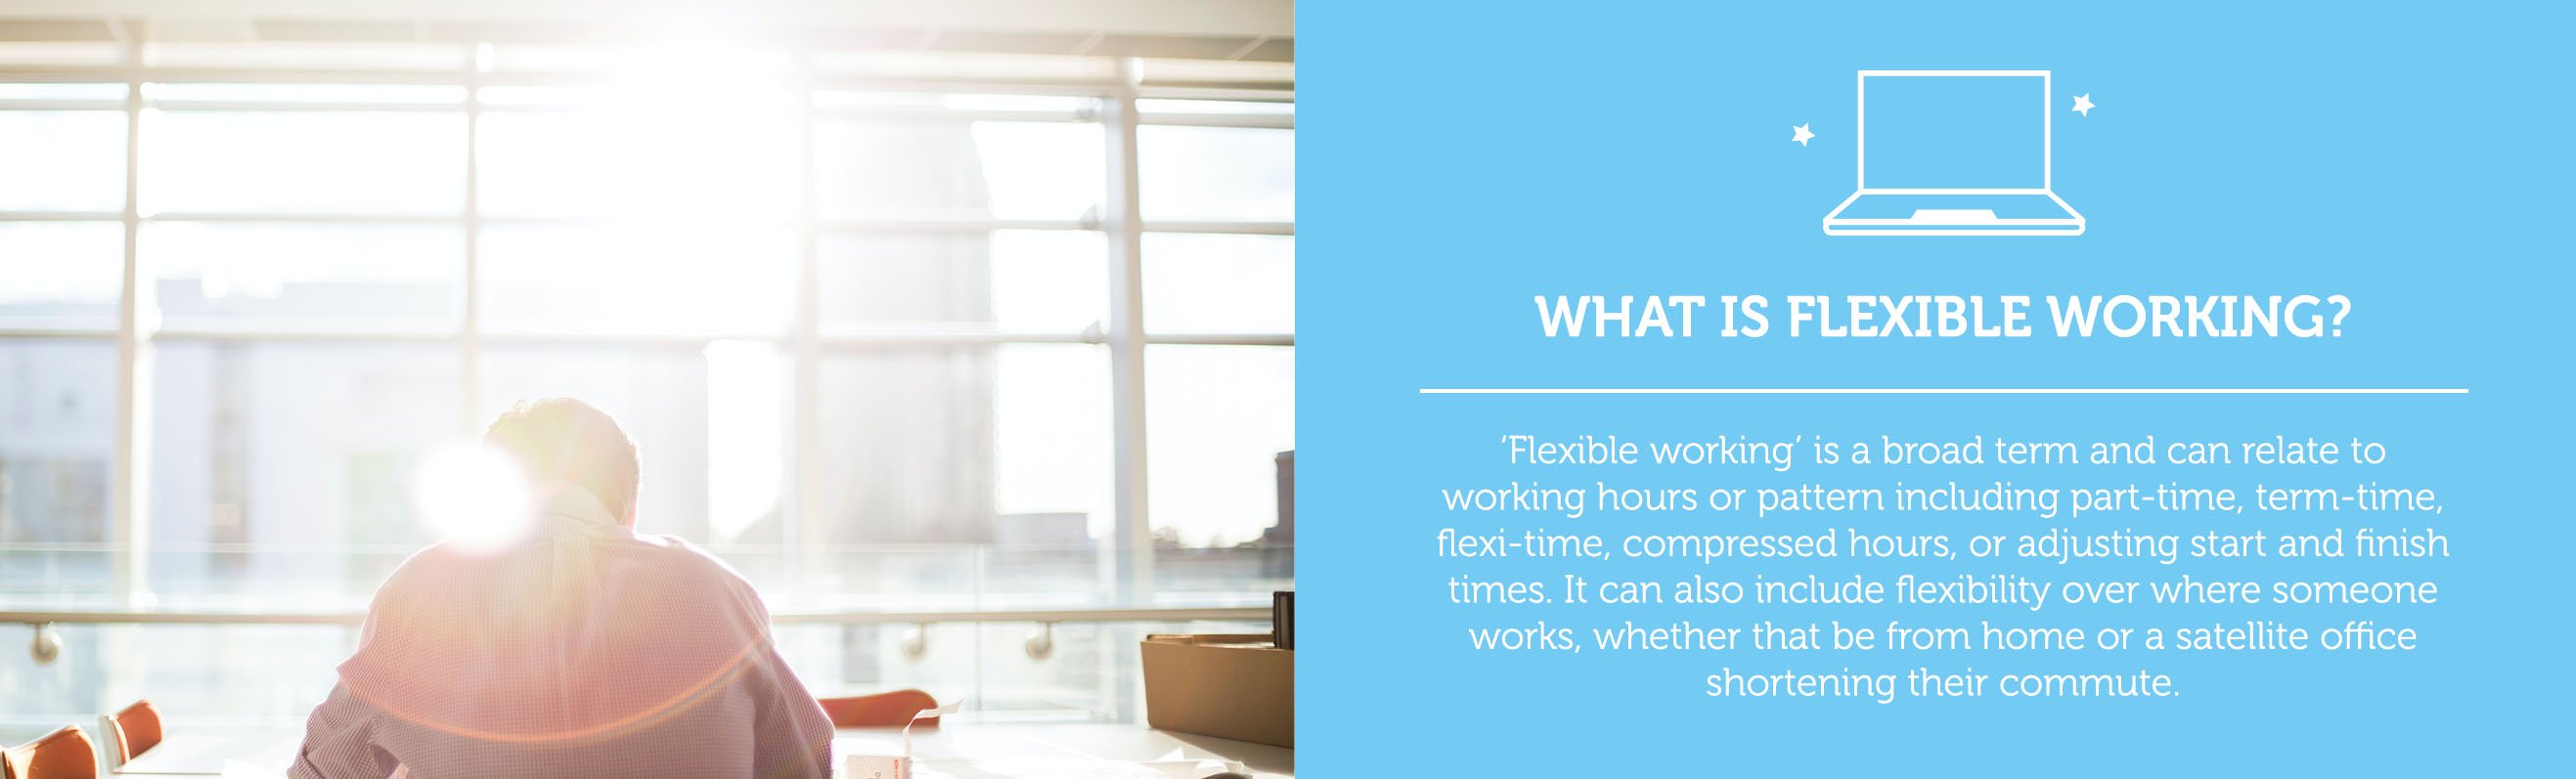 what is flexible working